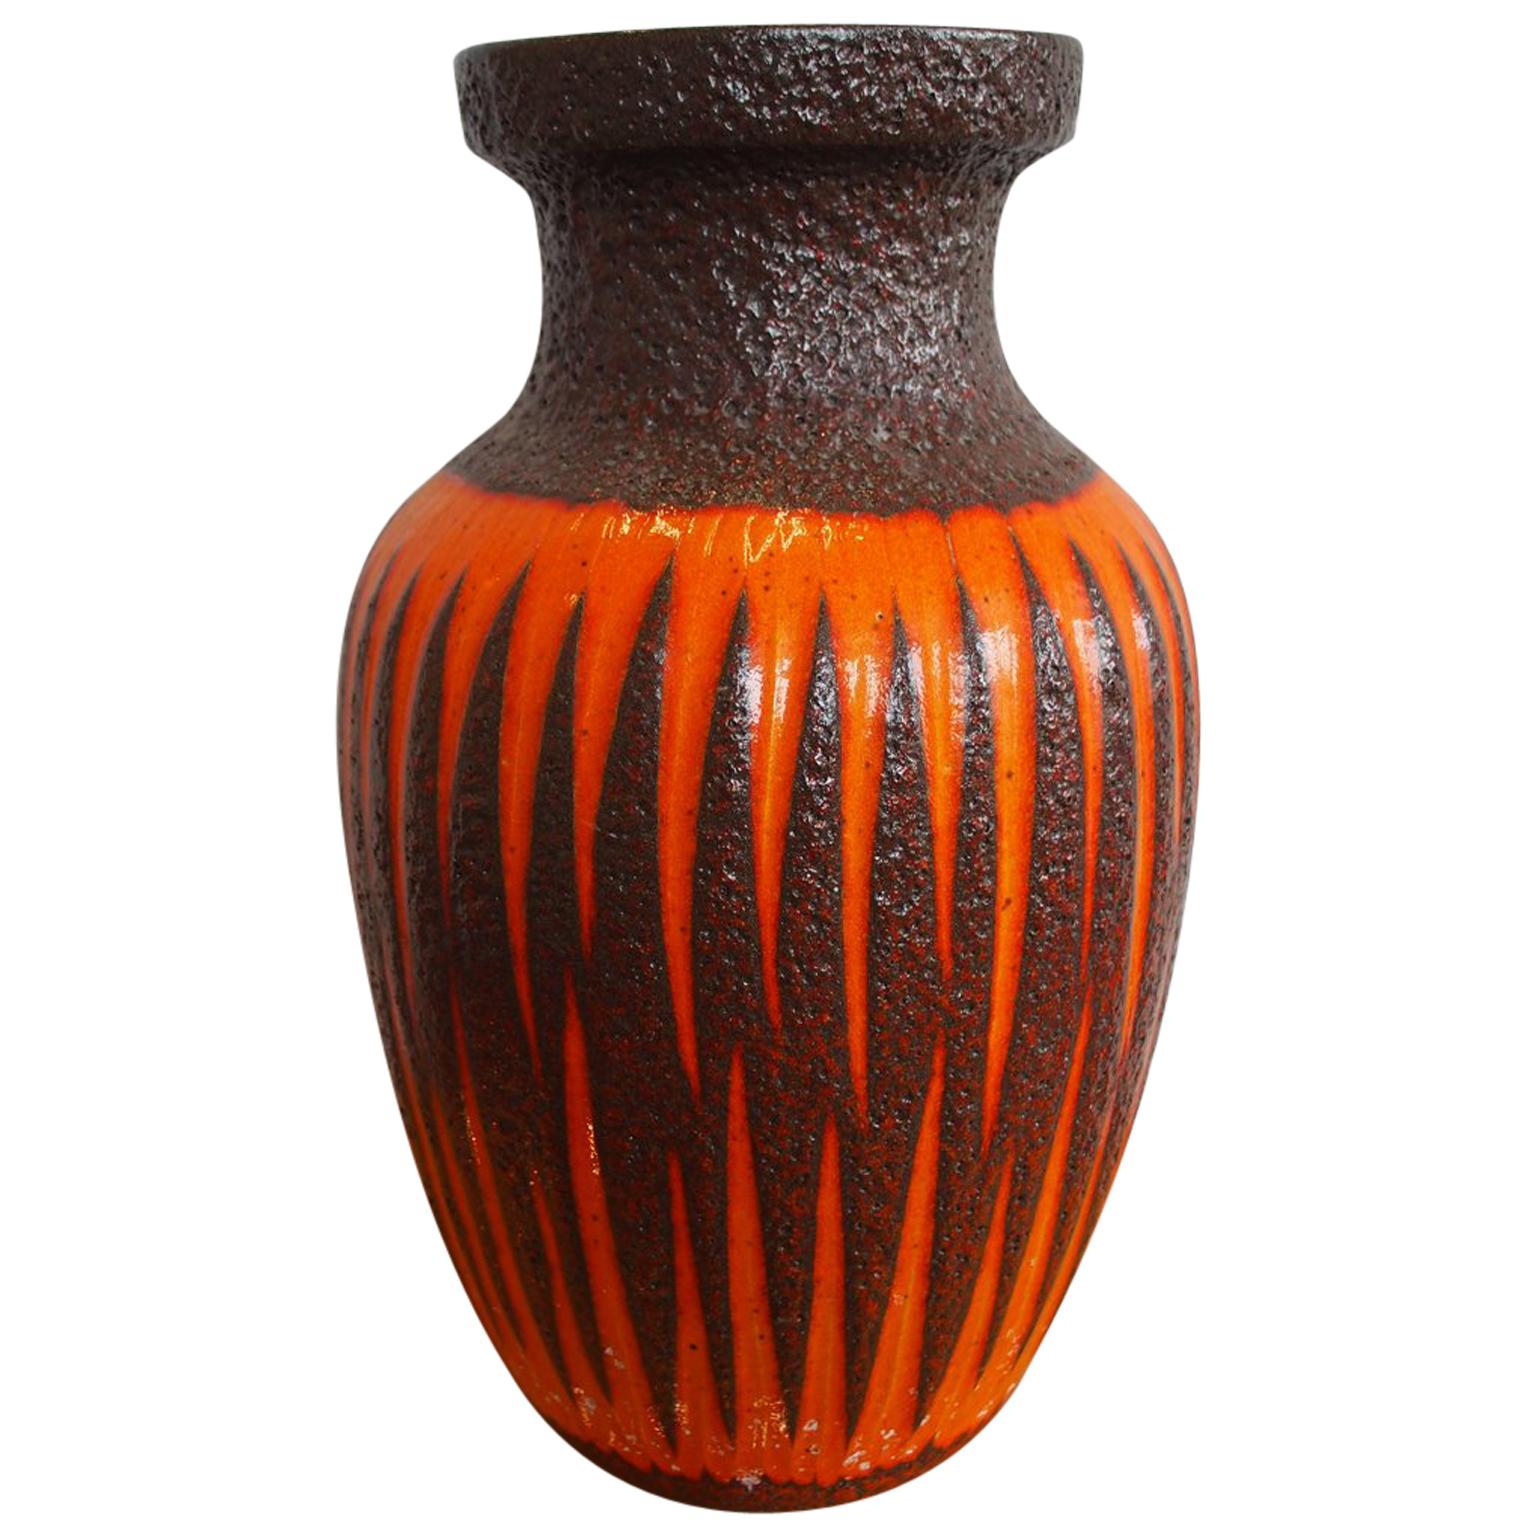 "Scheurich" Ceramic Vase with "Fat Lava" Glaze from the 1960s